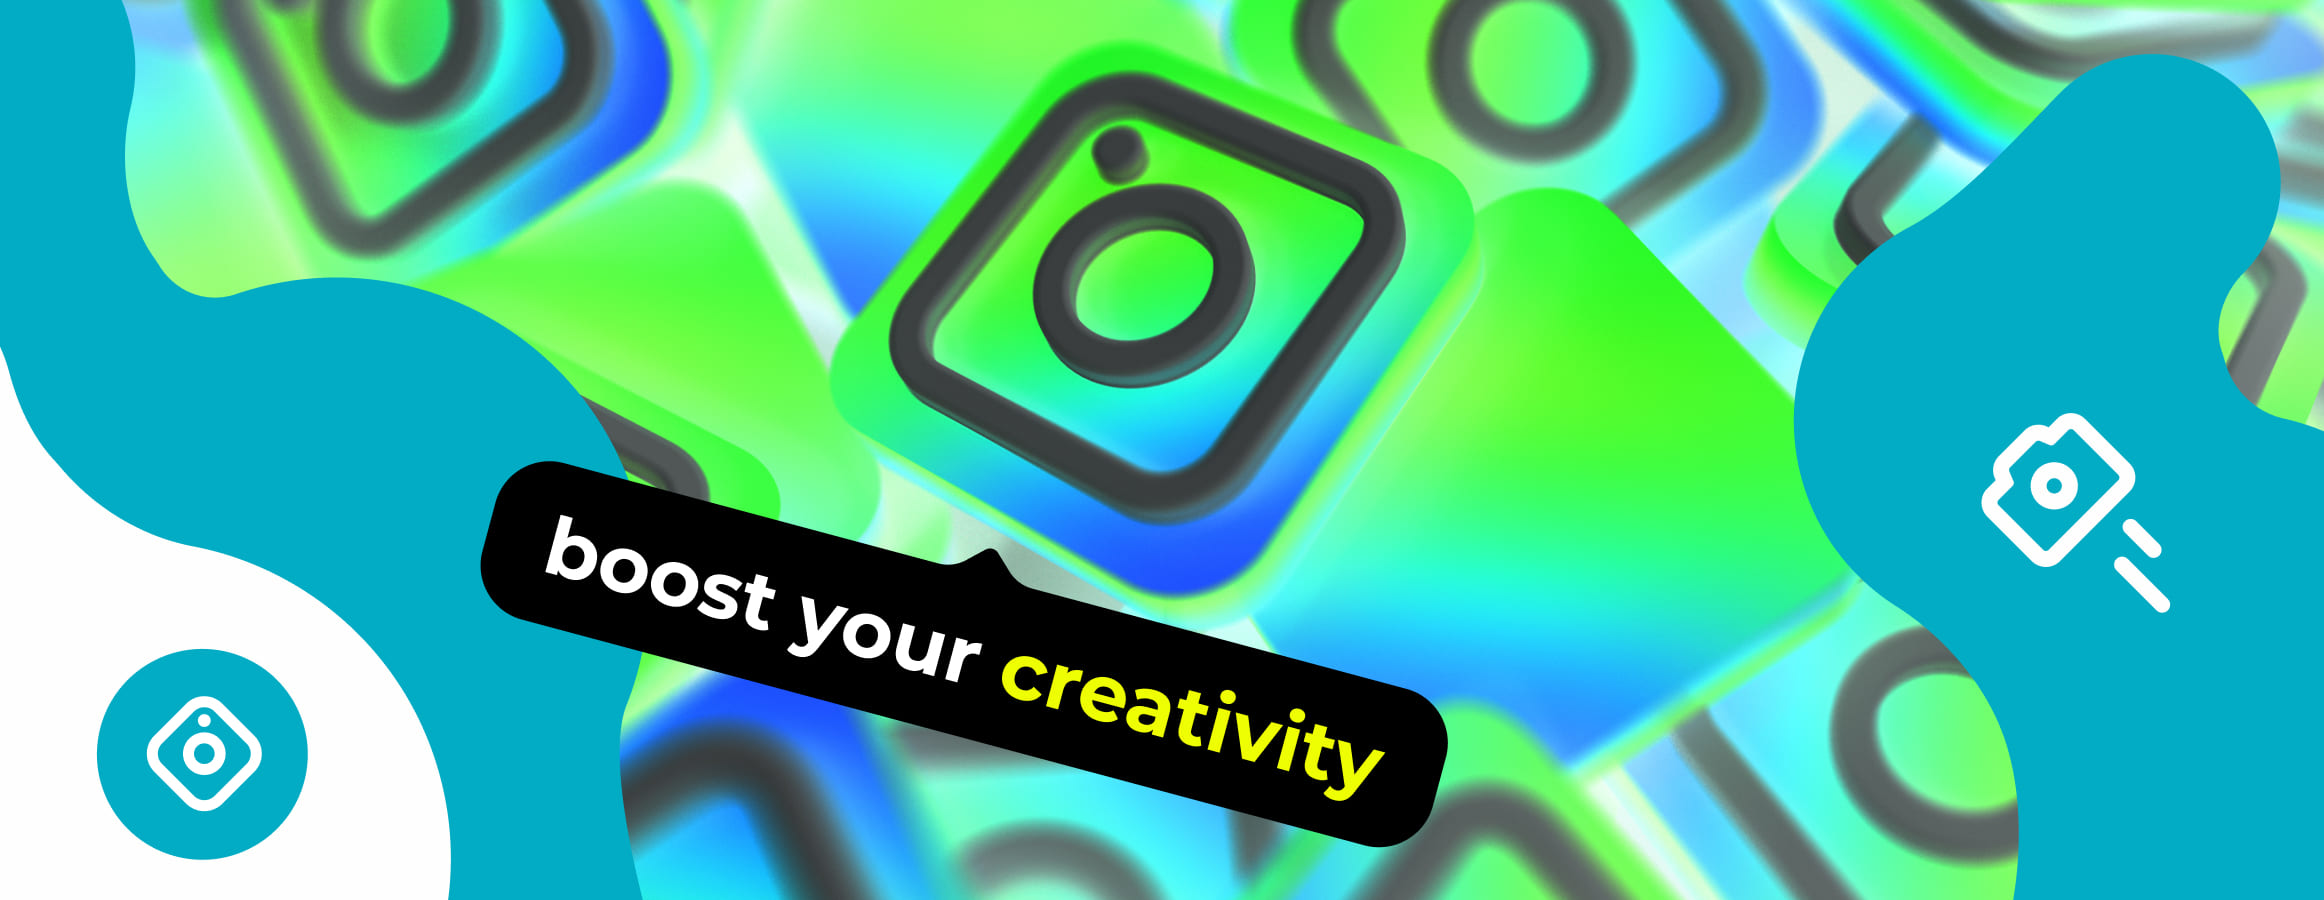 3.What to Post on Social Media When You’re Out of Creative Ideas.jpg